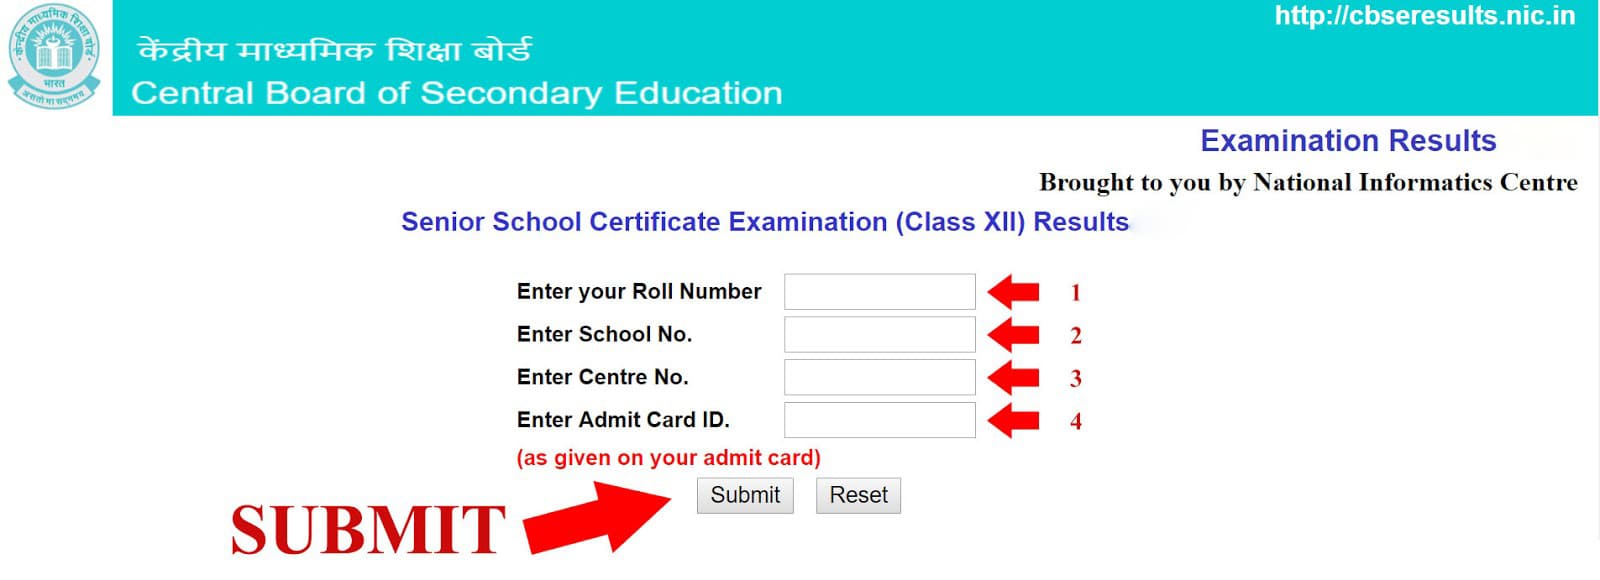 CBSE 12th Result Download